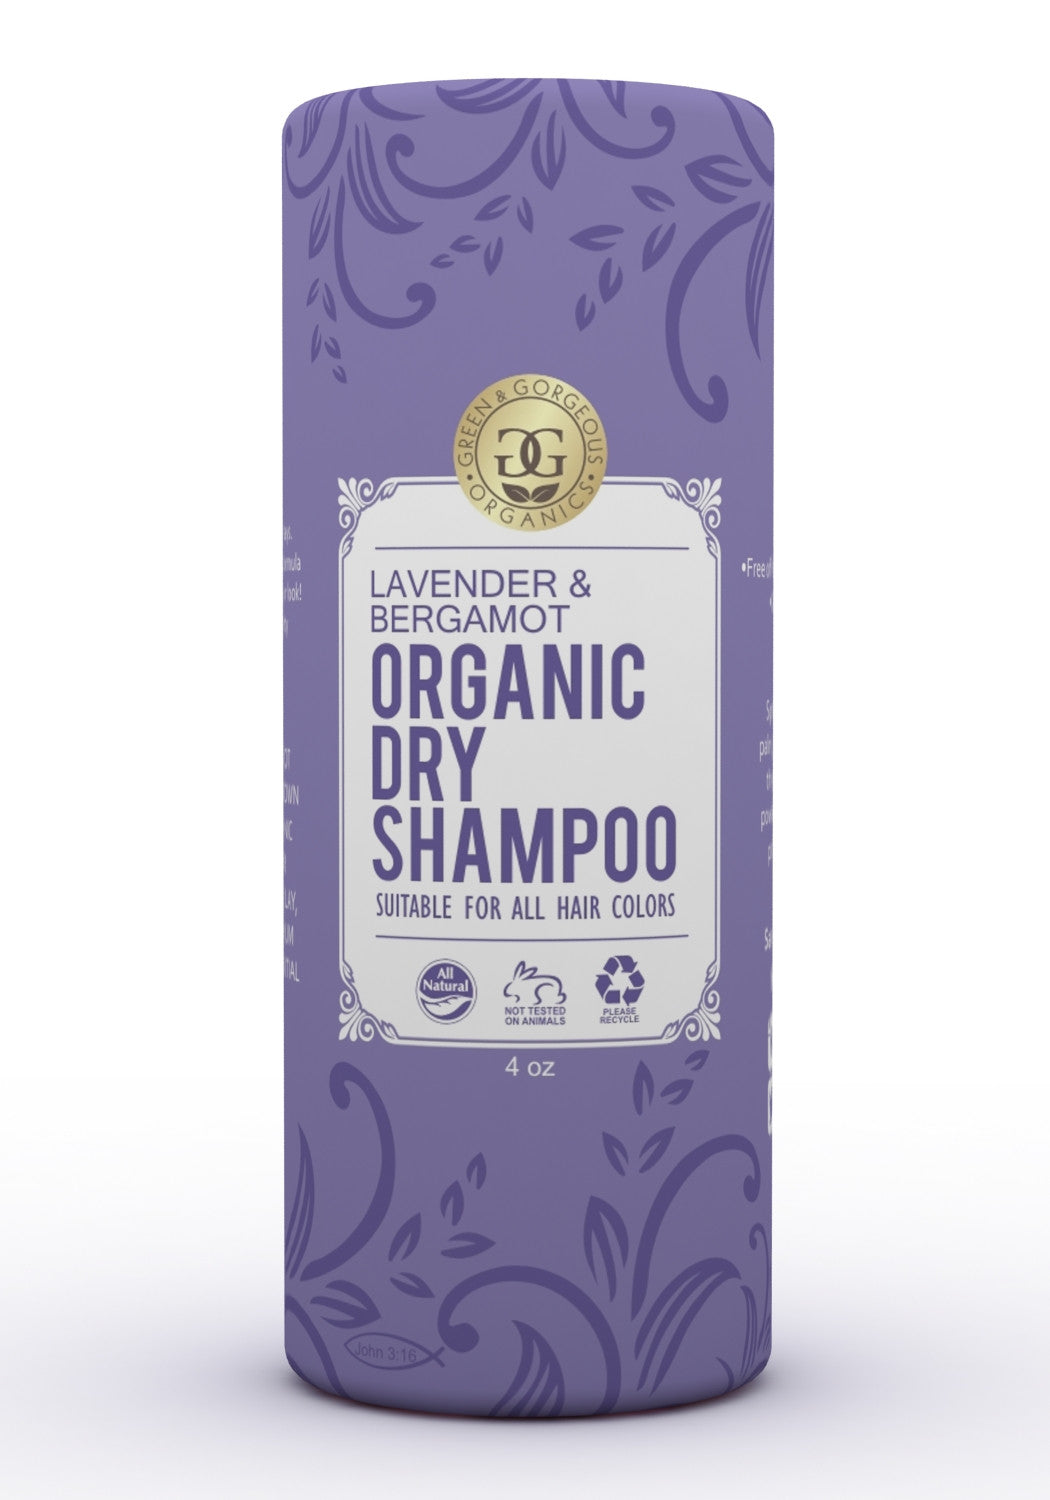 Hair Natural Green Shampoo and Oily Powder & Laven Types Dry LLC All Organic – - for Gorgeous Organics,